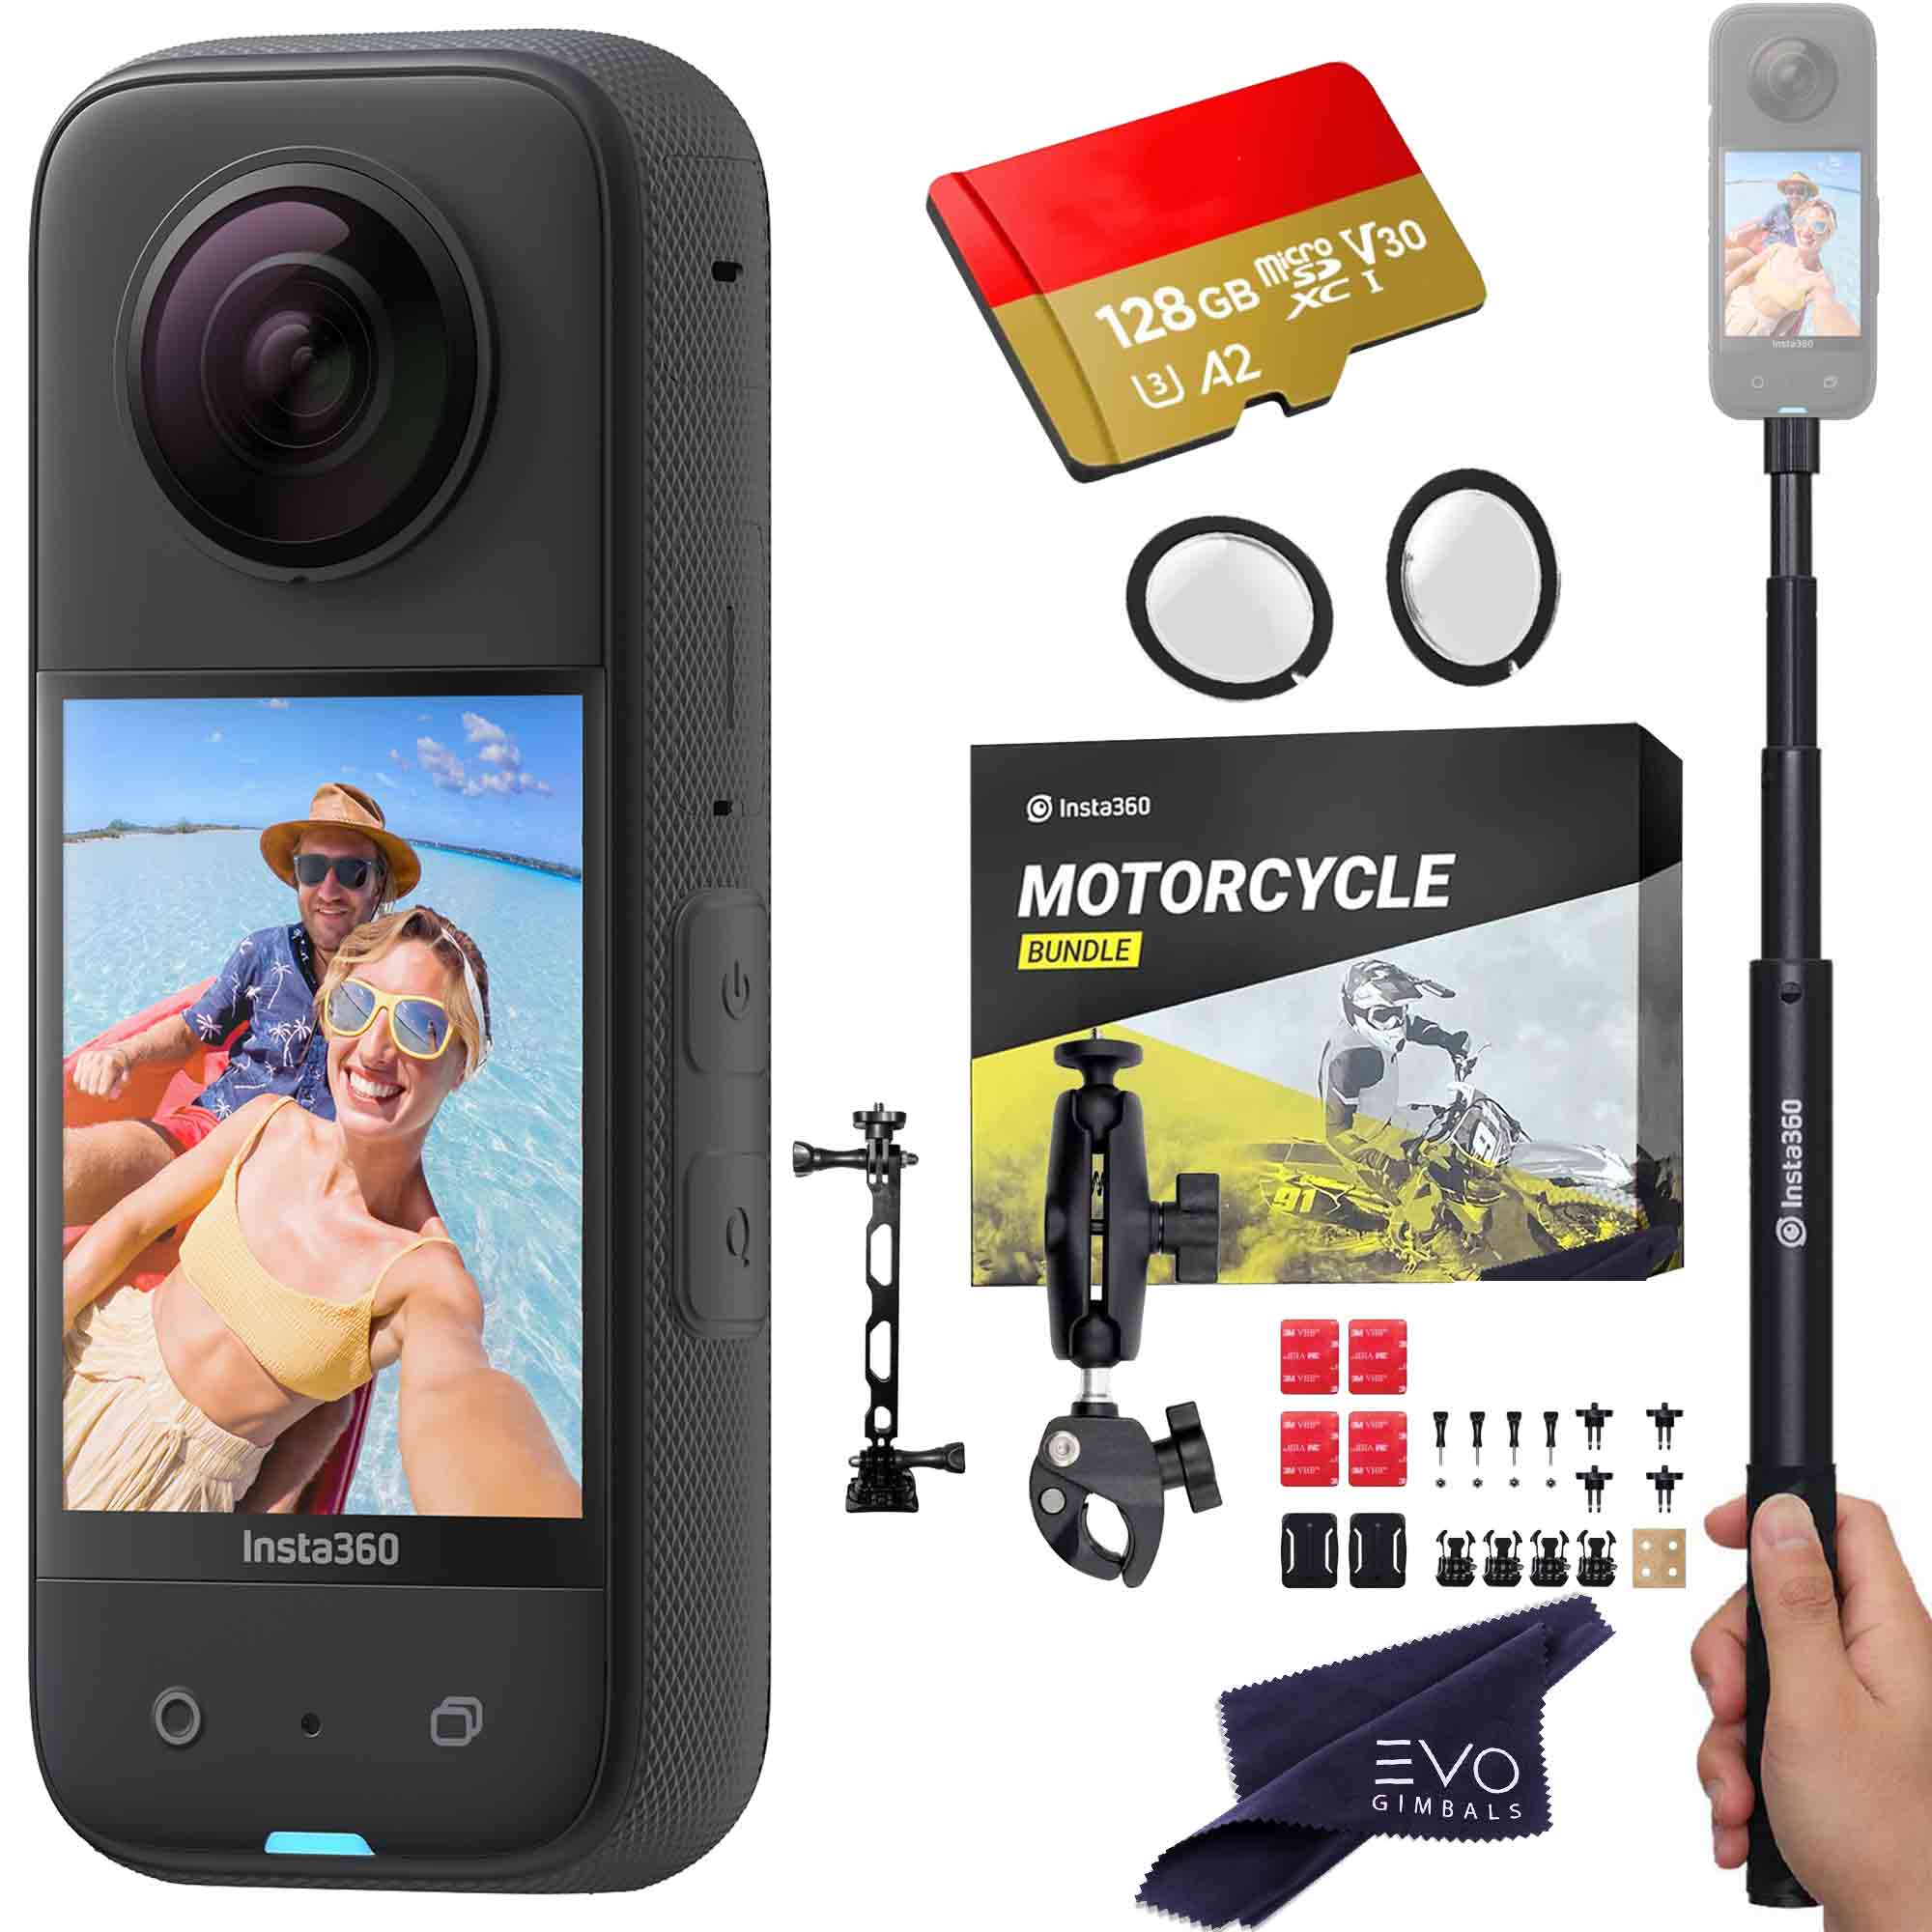 Insta360 X3 with Invisible bundle, Motorcycle camera stick, Len selfie